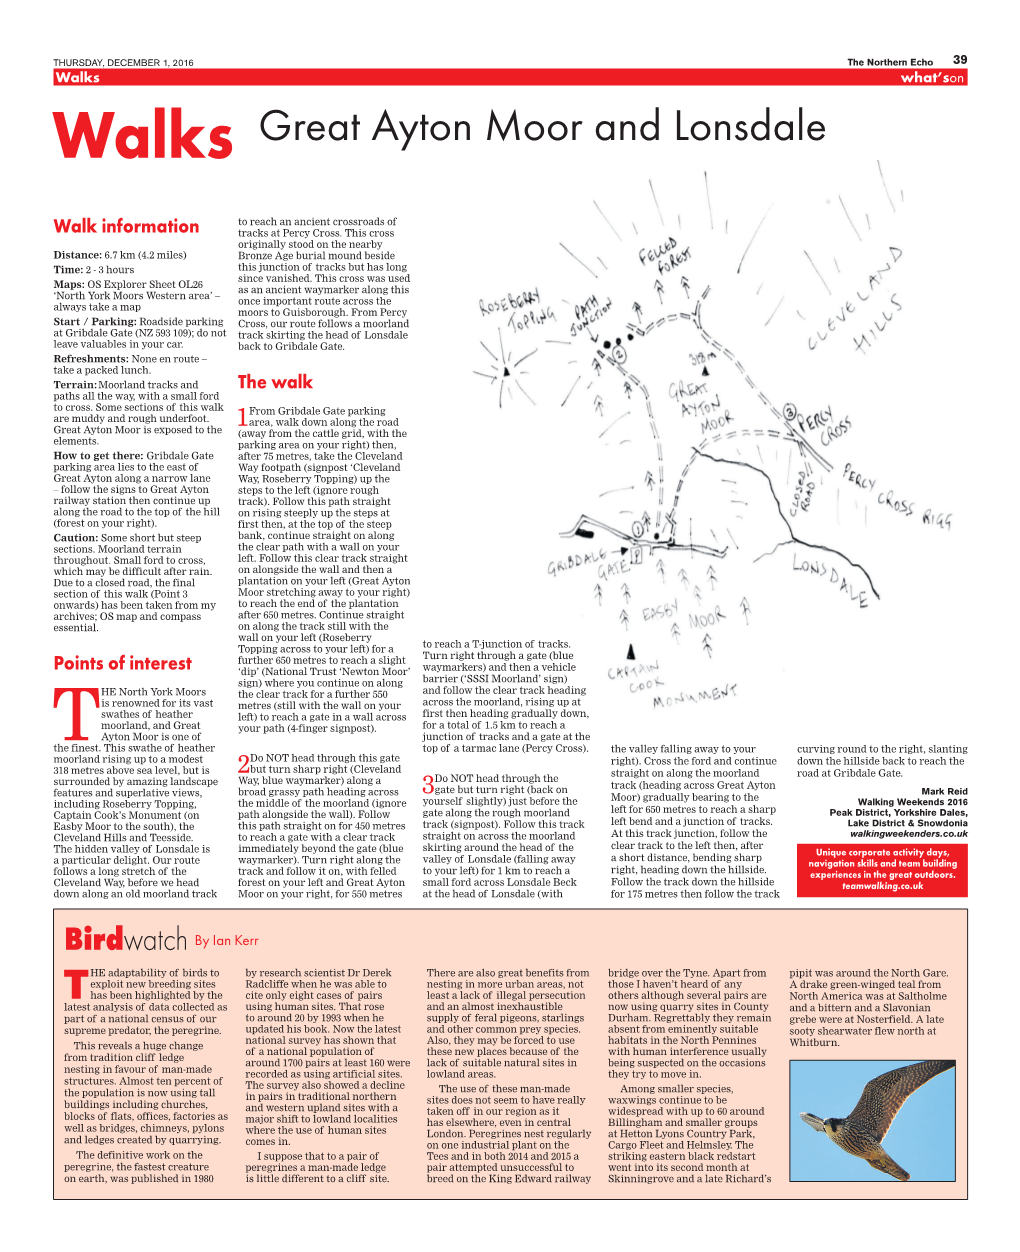 Great Ayton Moor and Lonsdale